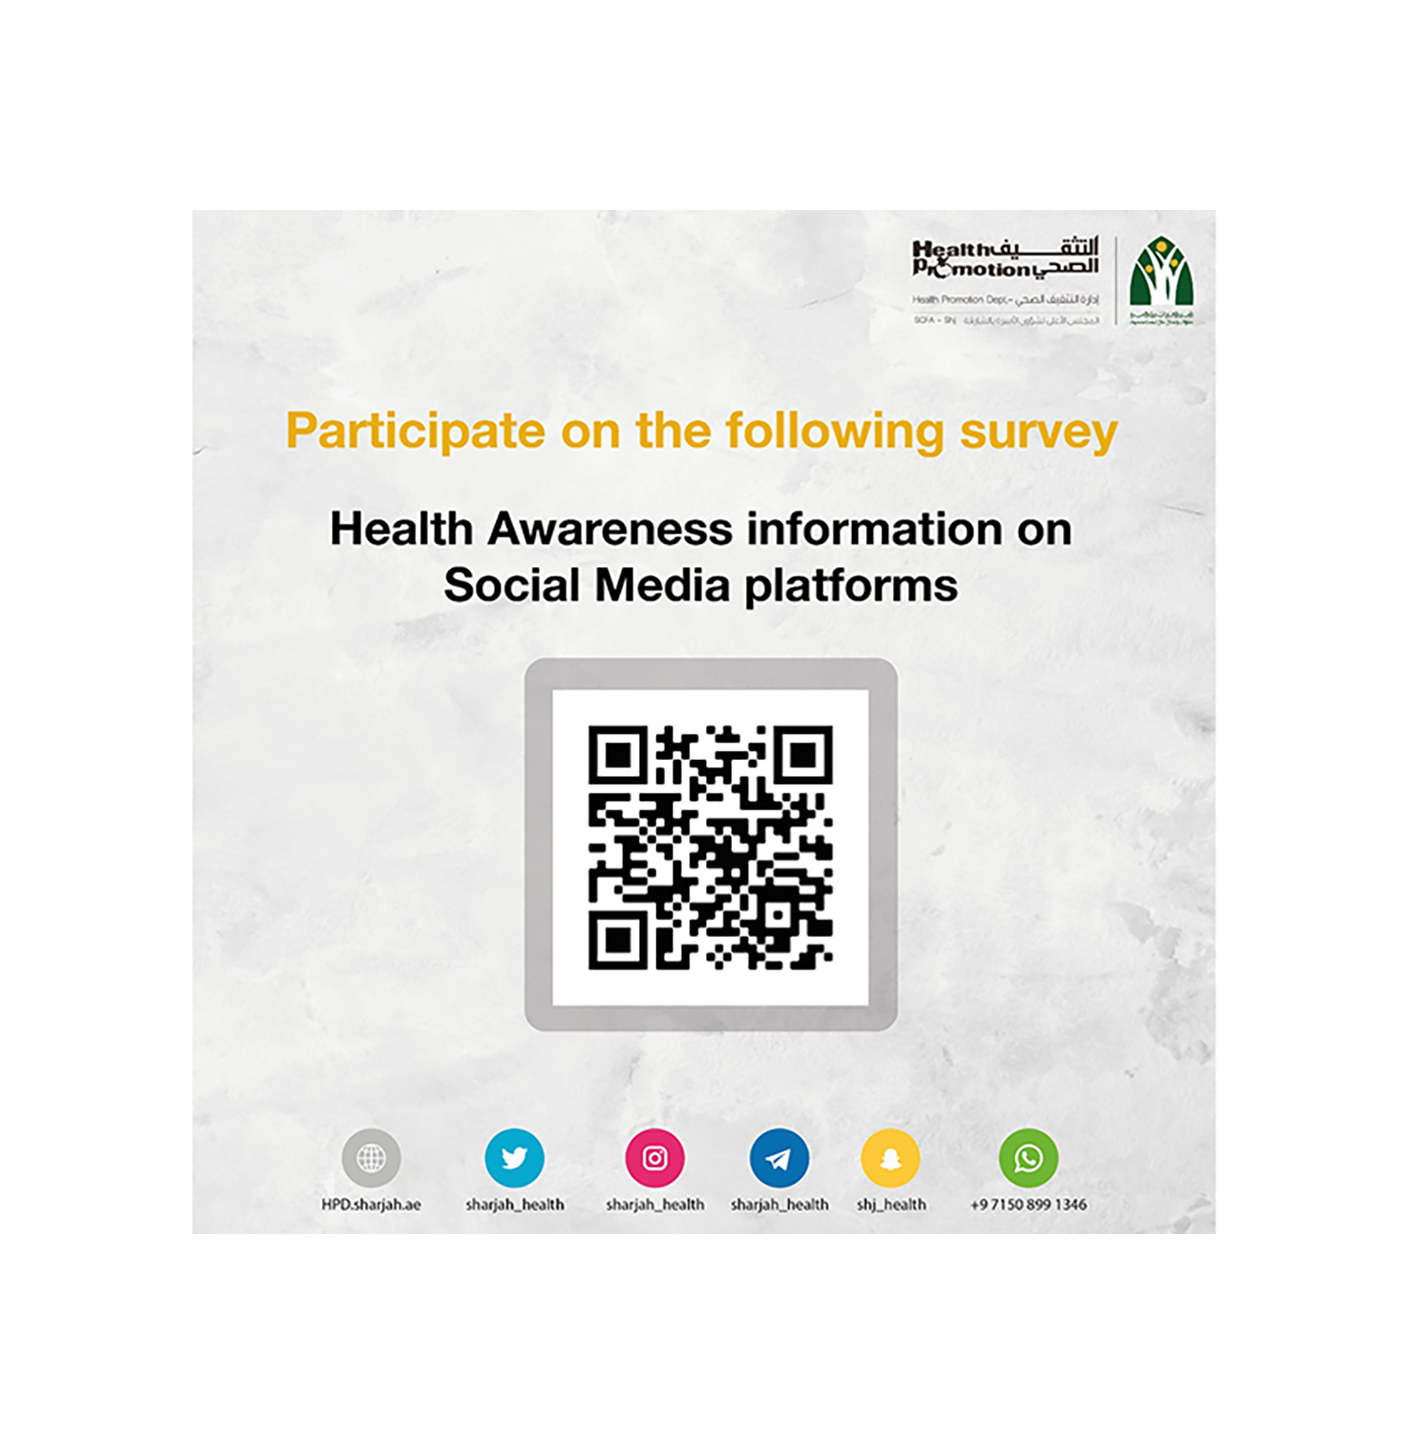 Sharjah’s Health Promotion Department launches mental image questionnaire for its social media platforms